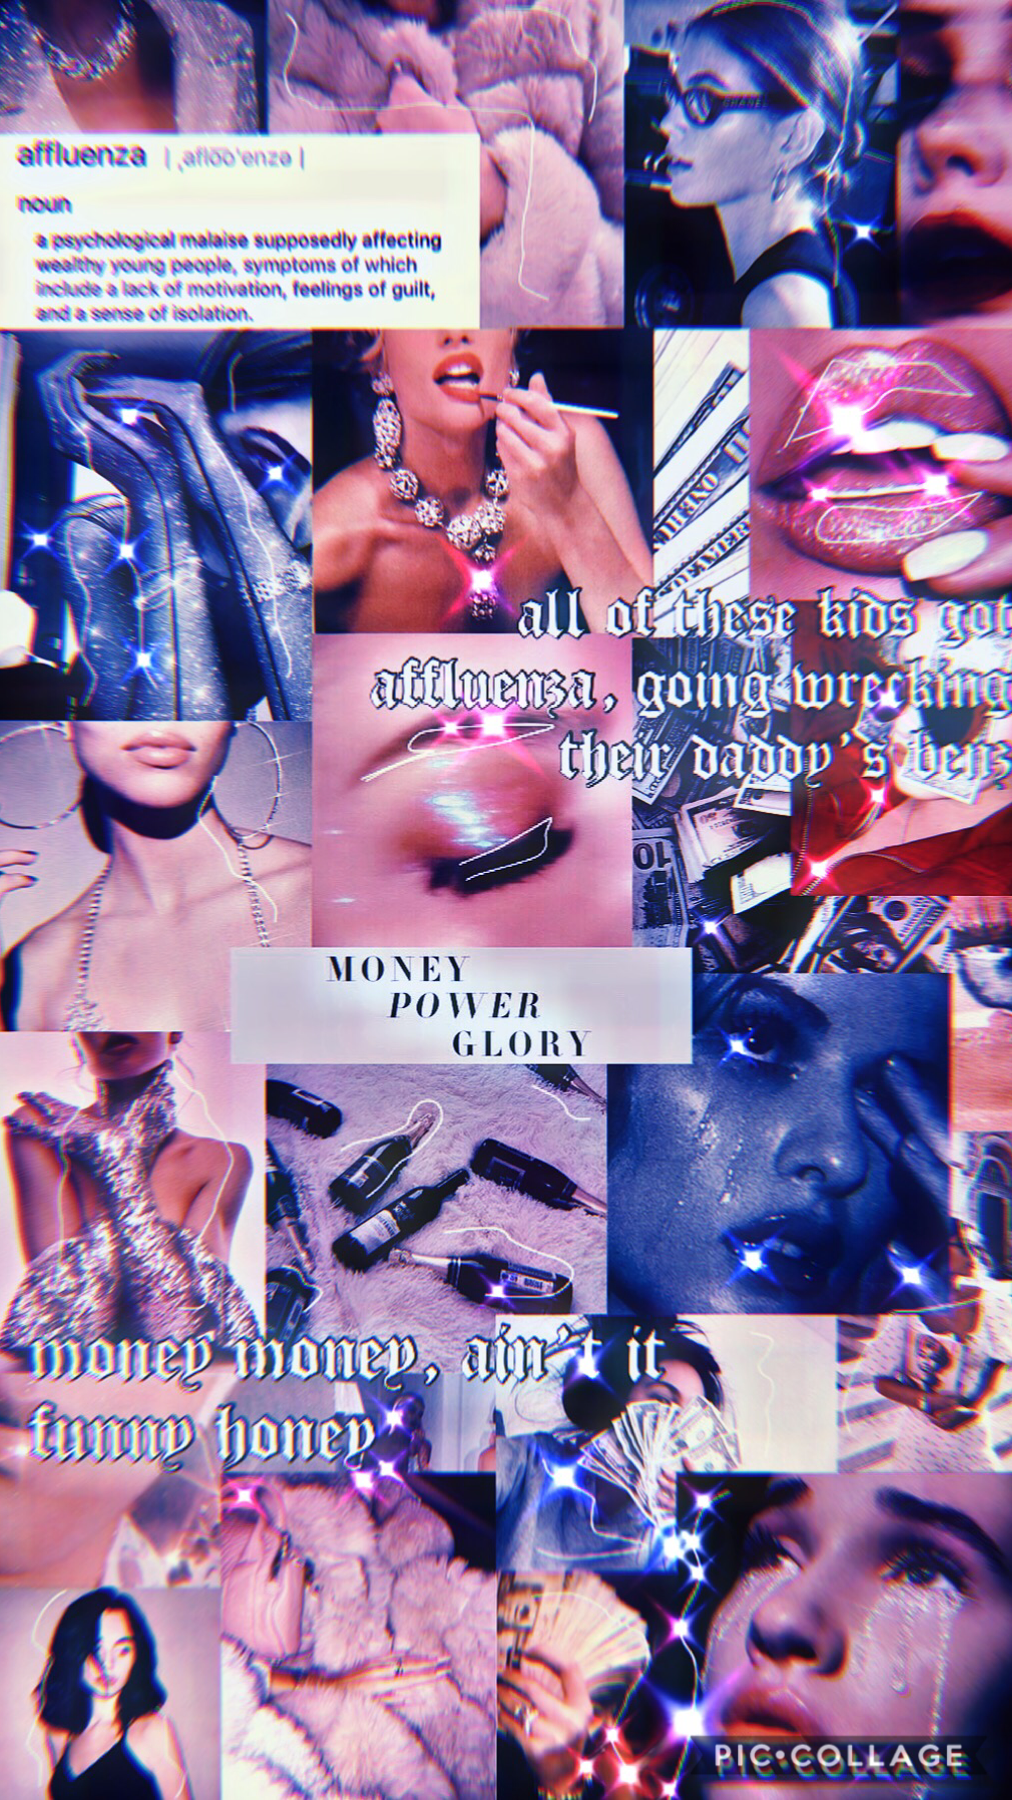 ✨ T A P 
— this is based on conan gray’s song “affluenza” 🥰 i’ll put what he said about the song in the comments so you guys can better understand what this collage is about 